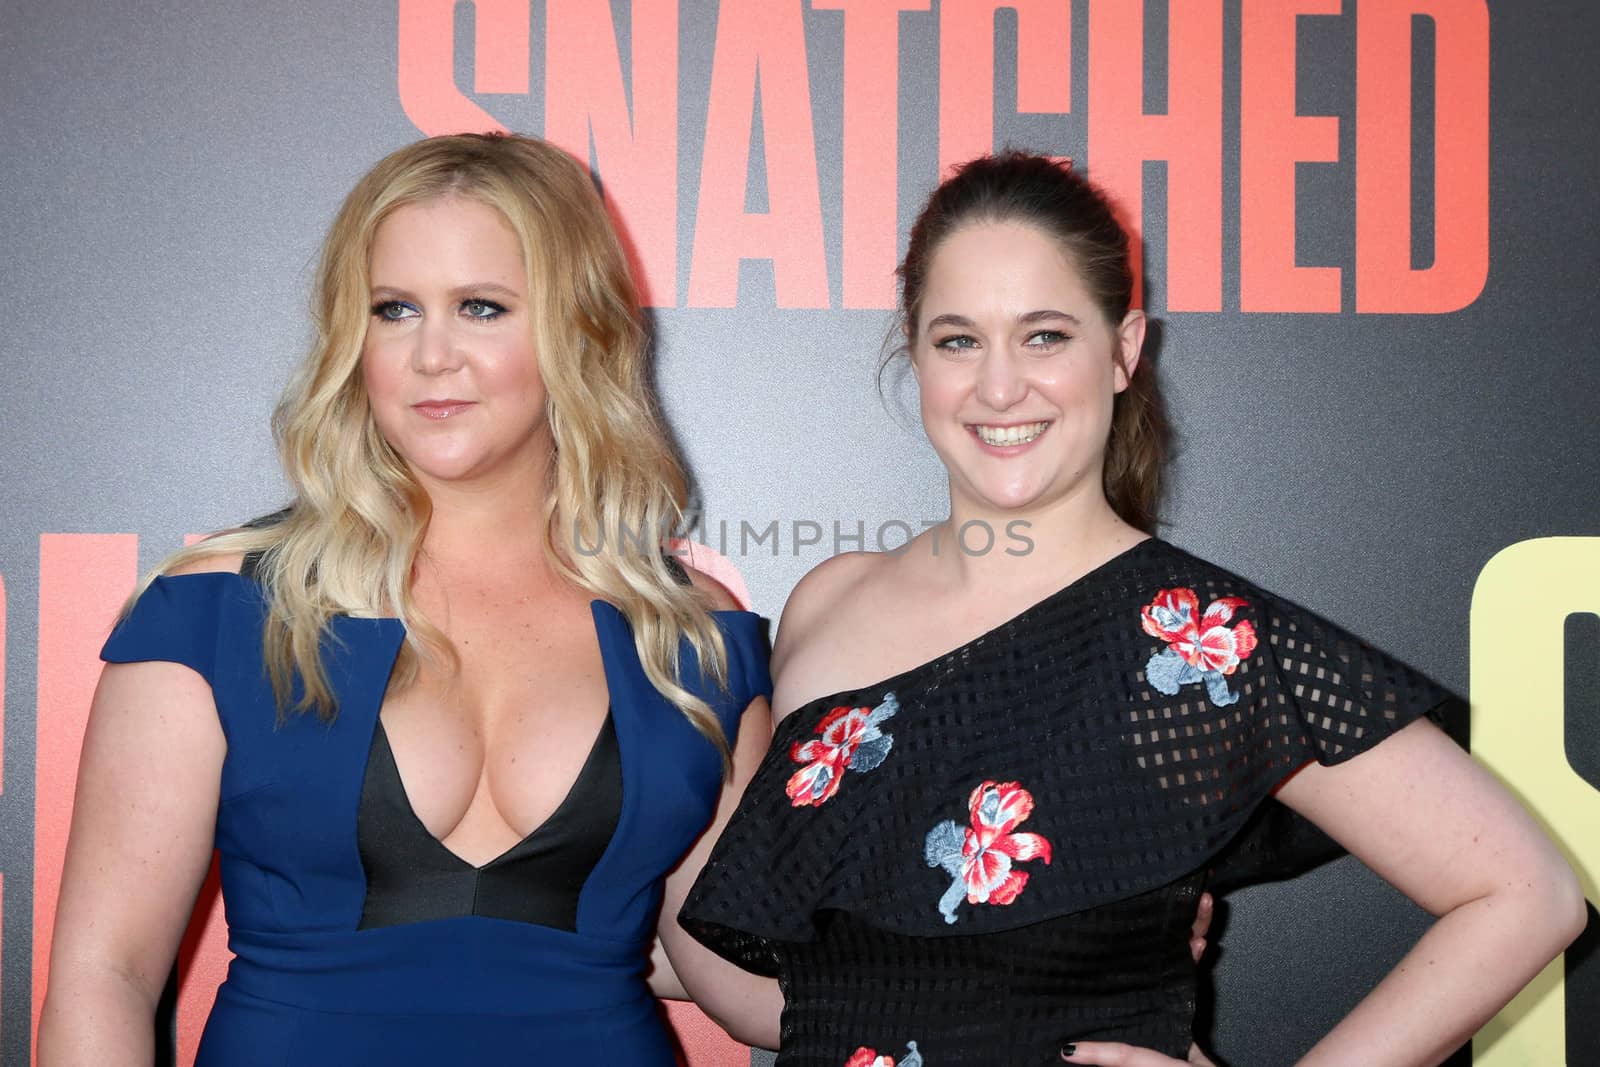 Amy Schumer, Kim Caramele at the "Snatched" World Premiere, Village Theater, Westwood, CA 05-10-17